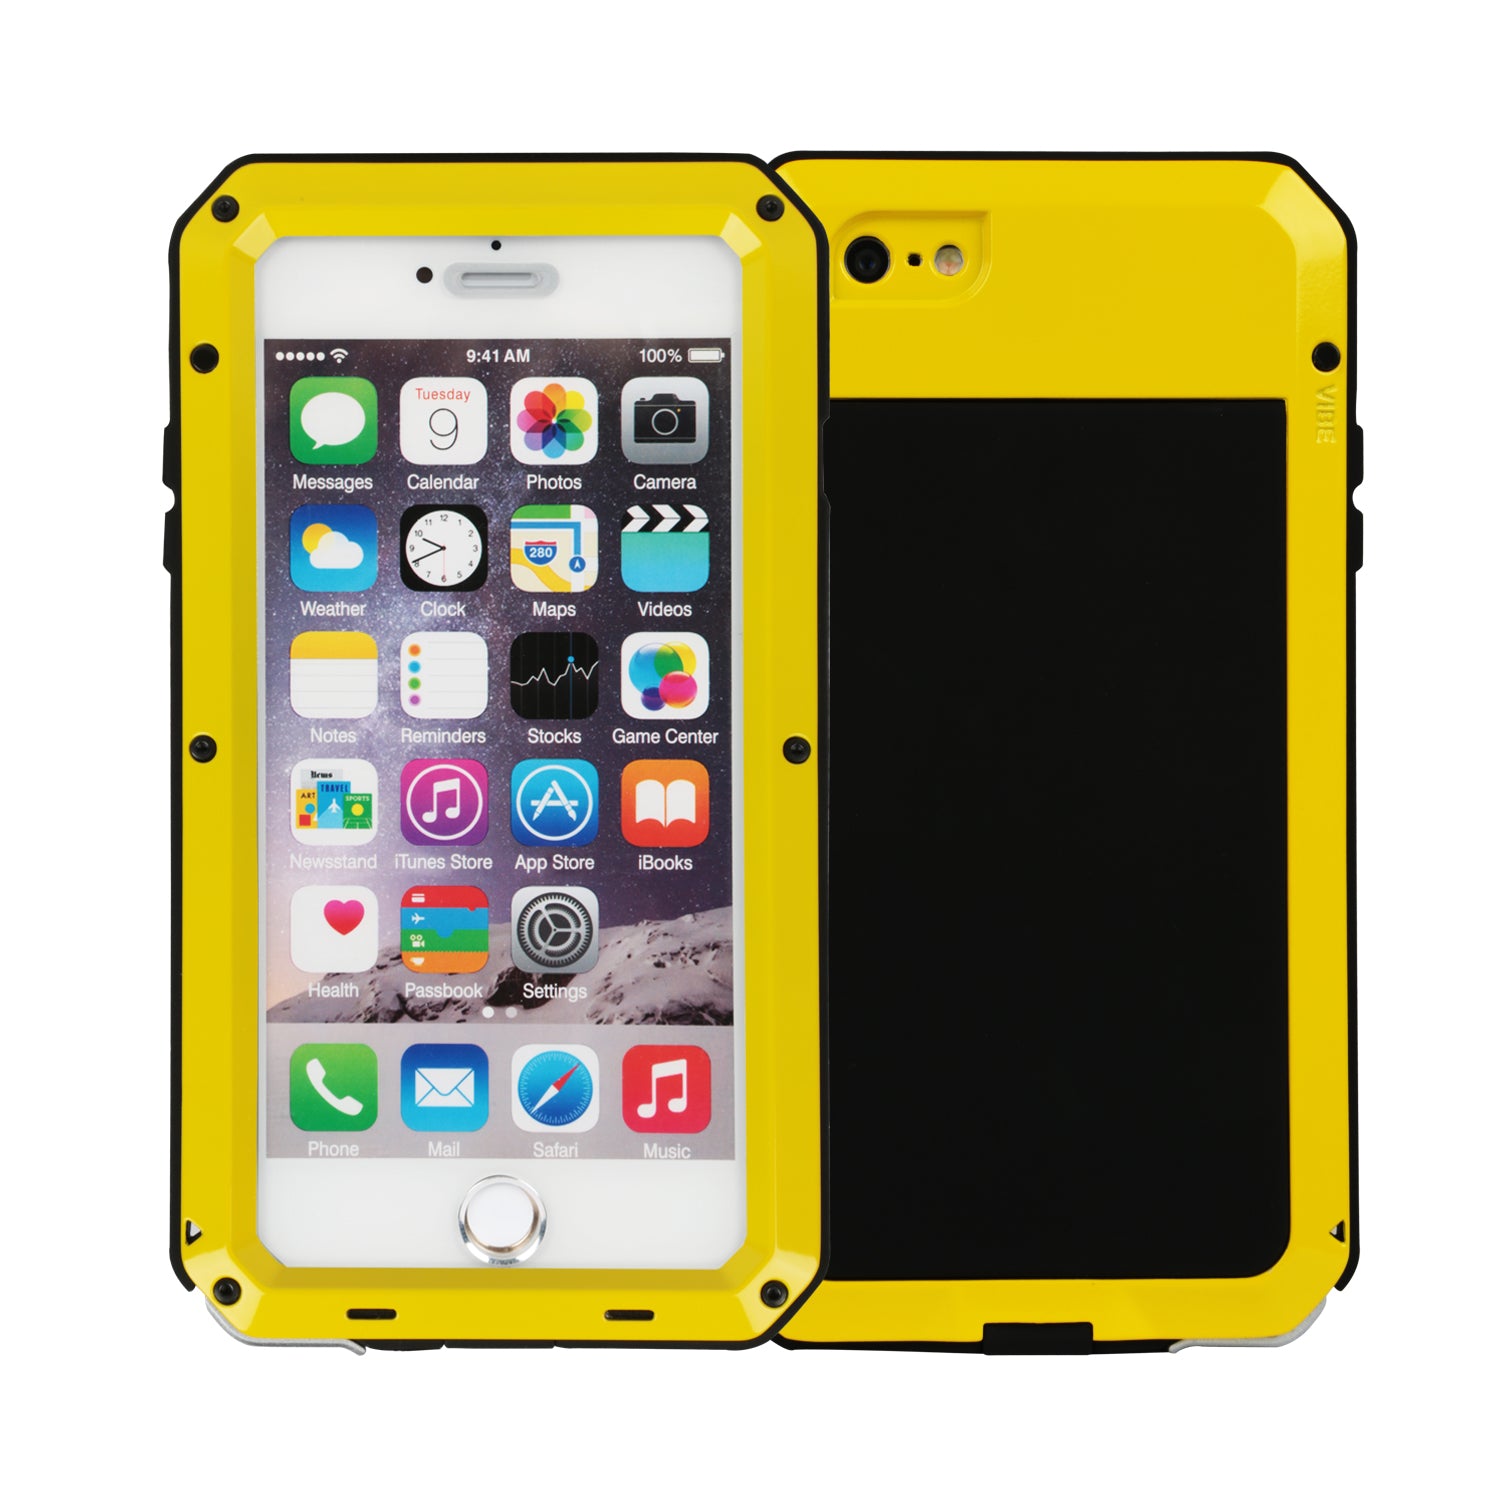 title:Rugged Shock-Resistant Hybrid Full Cover Case For iPhone 6 Plus;color:Yellow